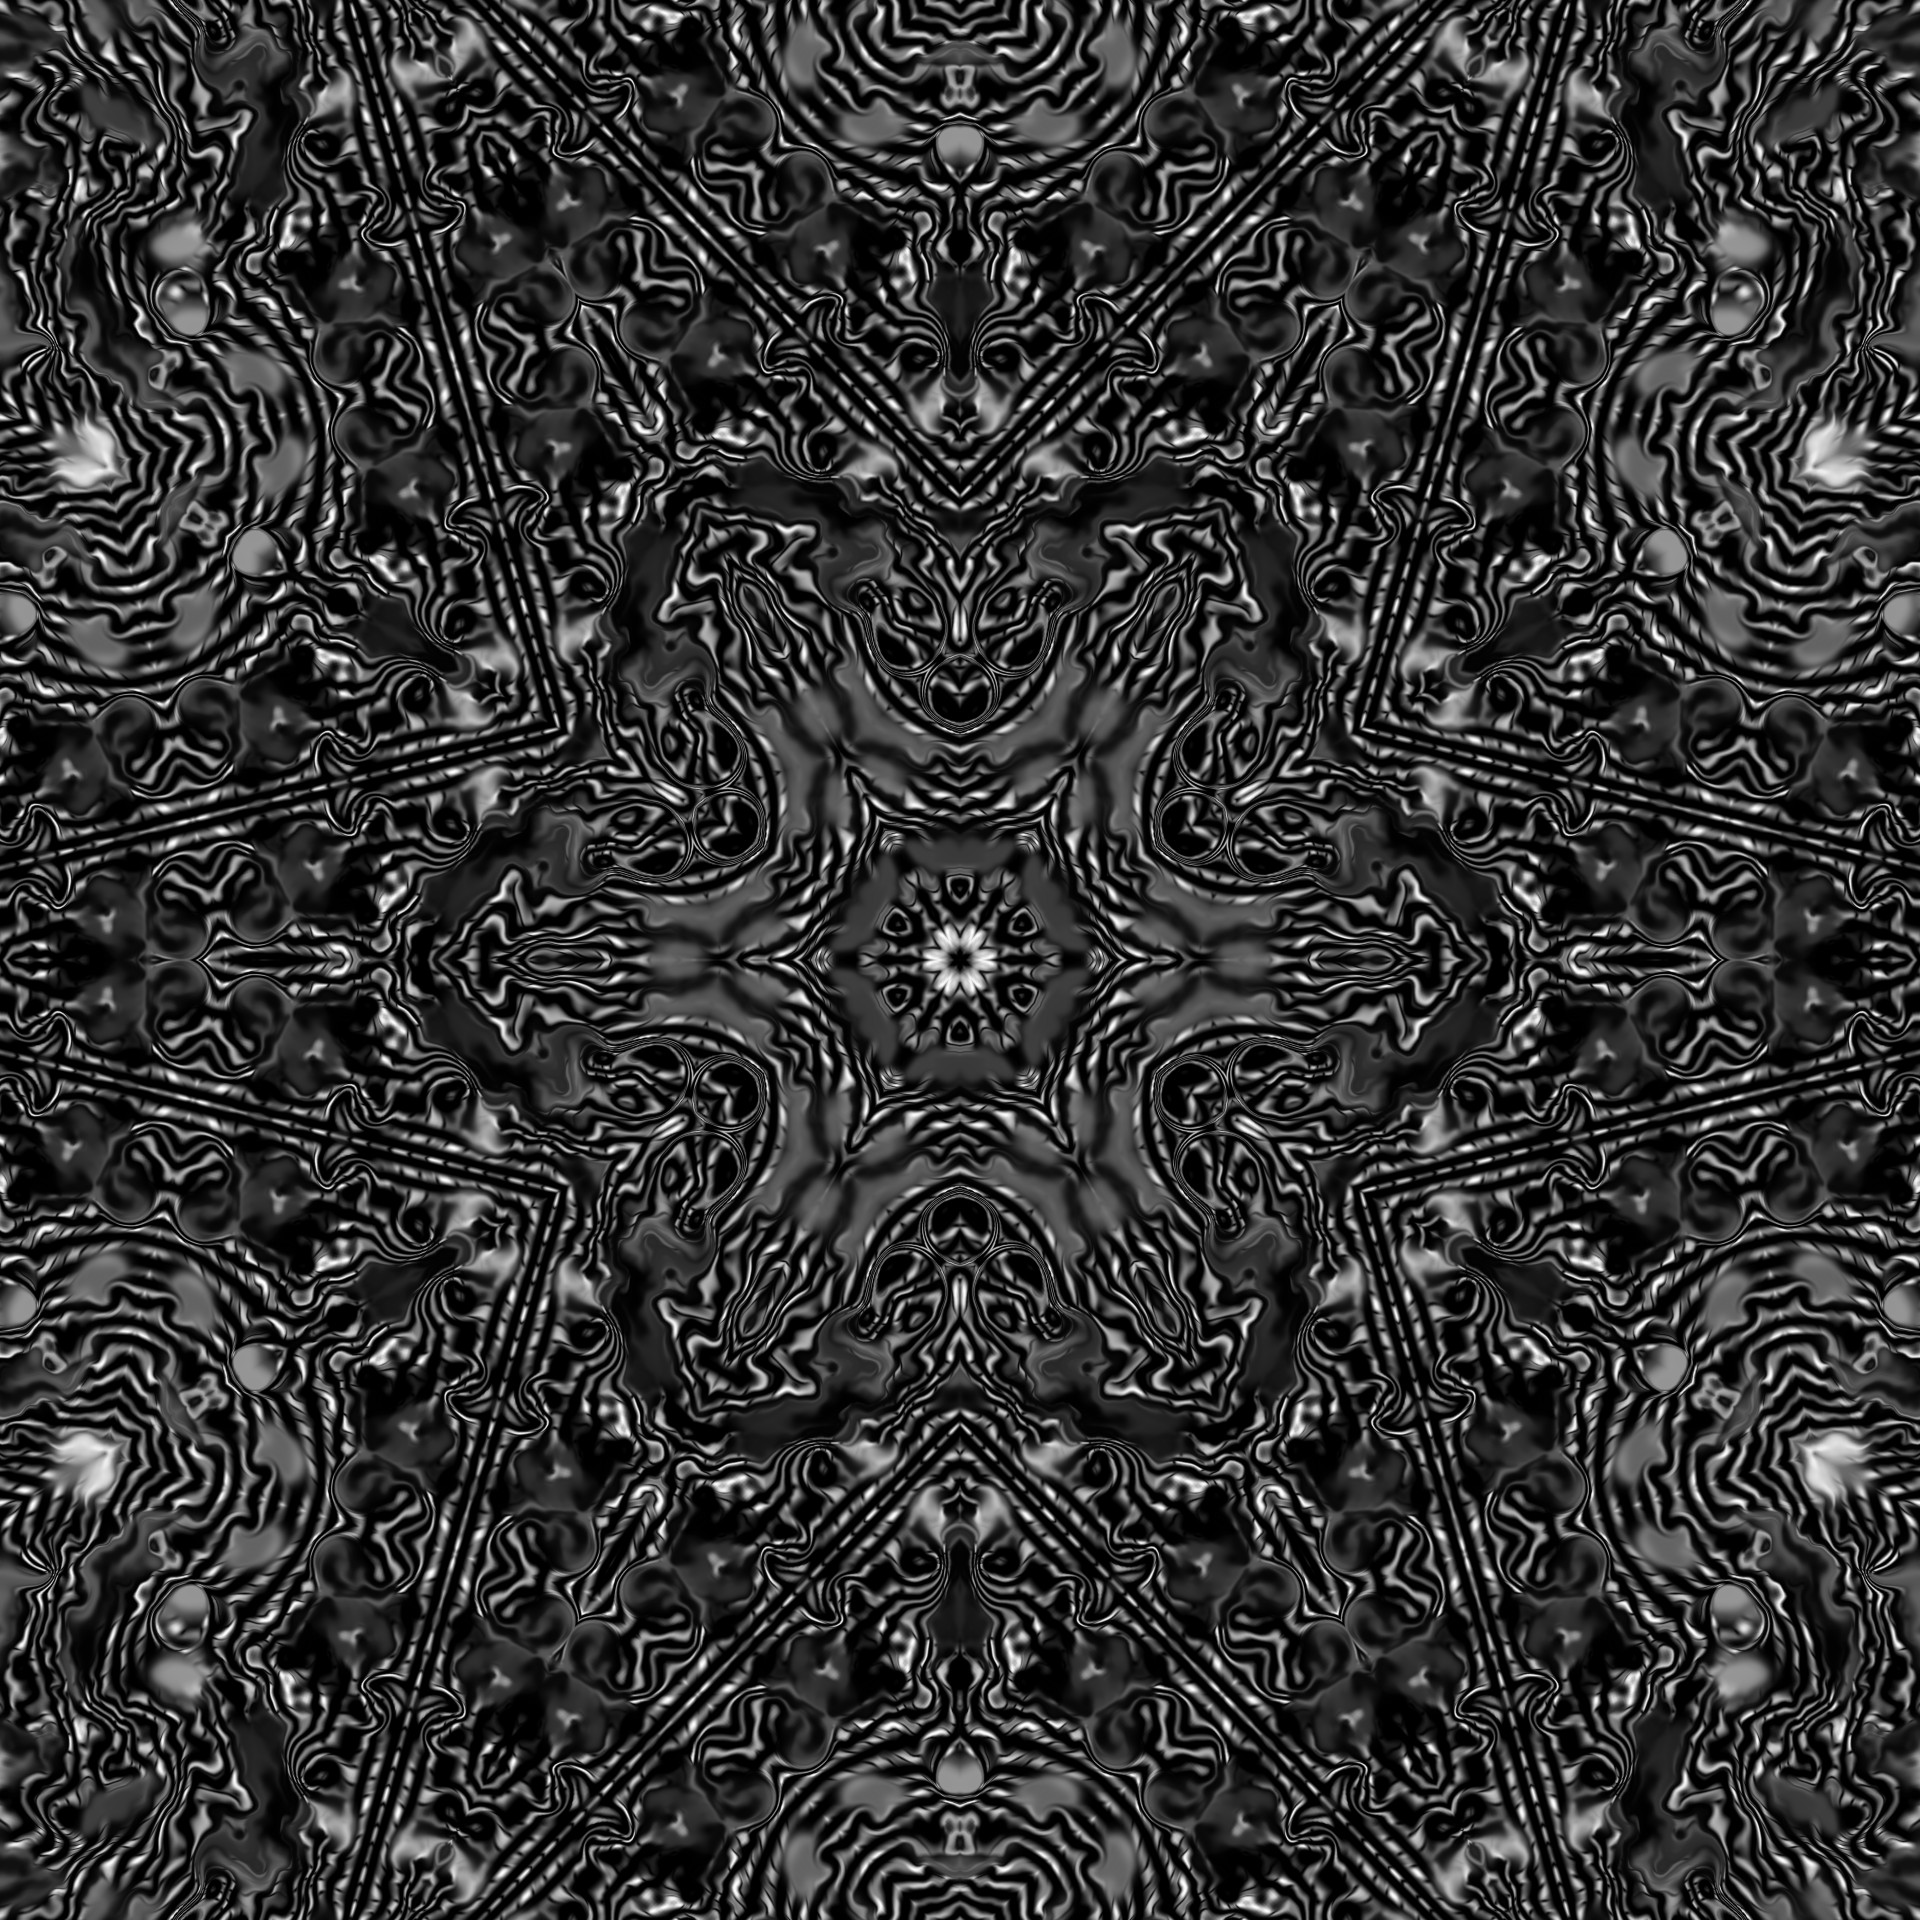 Made with Photoshop Elements 7 and a kaleidoscope plug in